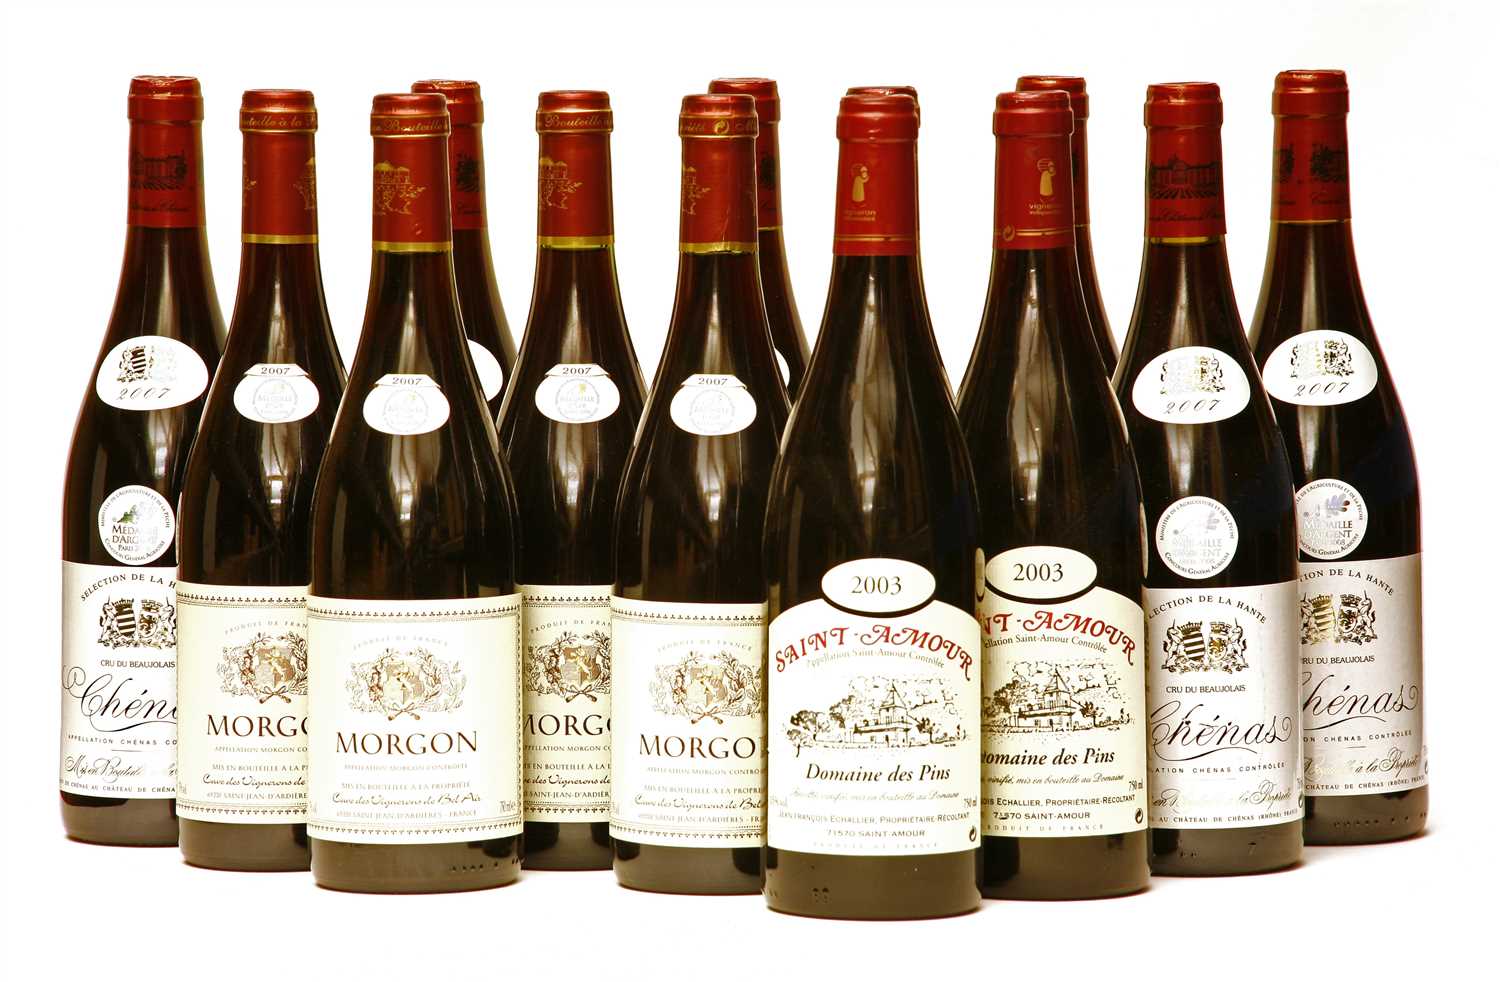 Lot 115 - Assorted Beaujolais: Chenas, 2007; Morgon, 2007 and Saint-Amour, 2003, 13 bottles total